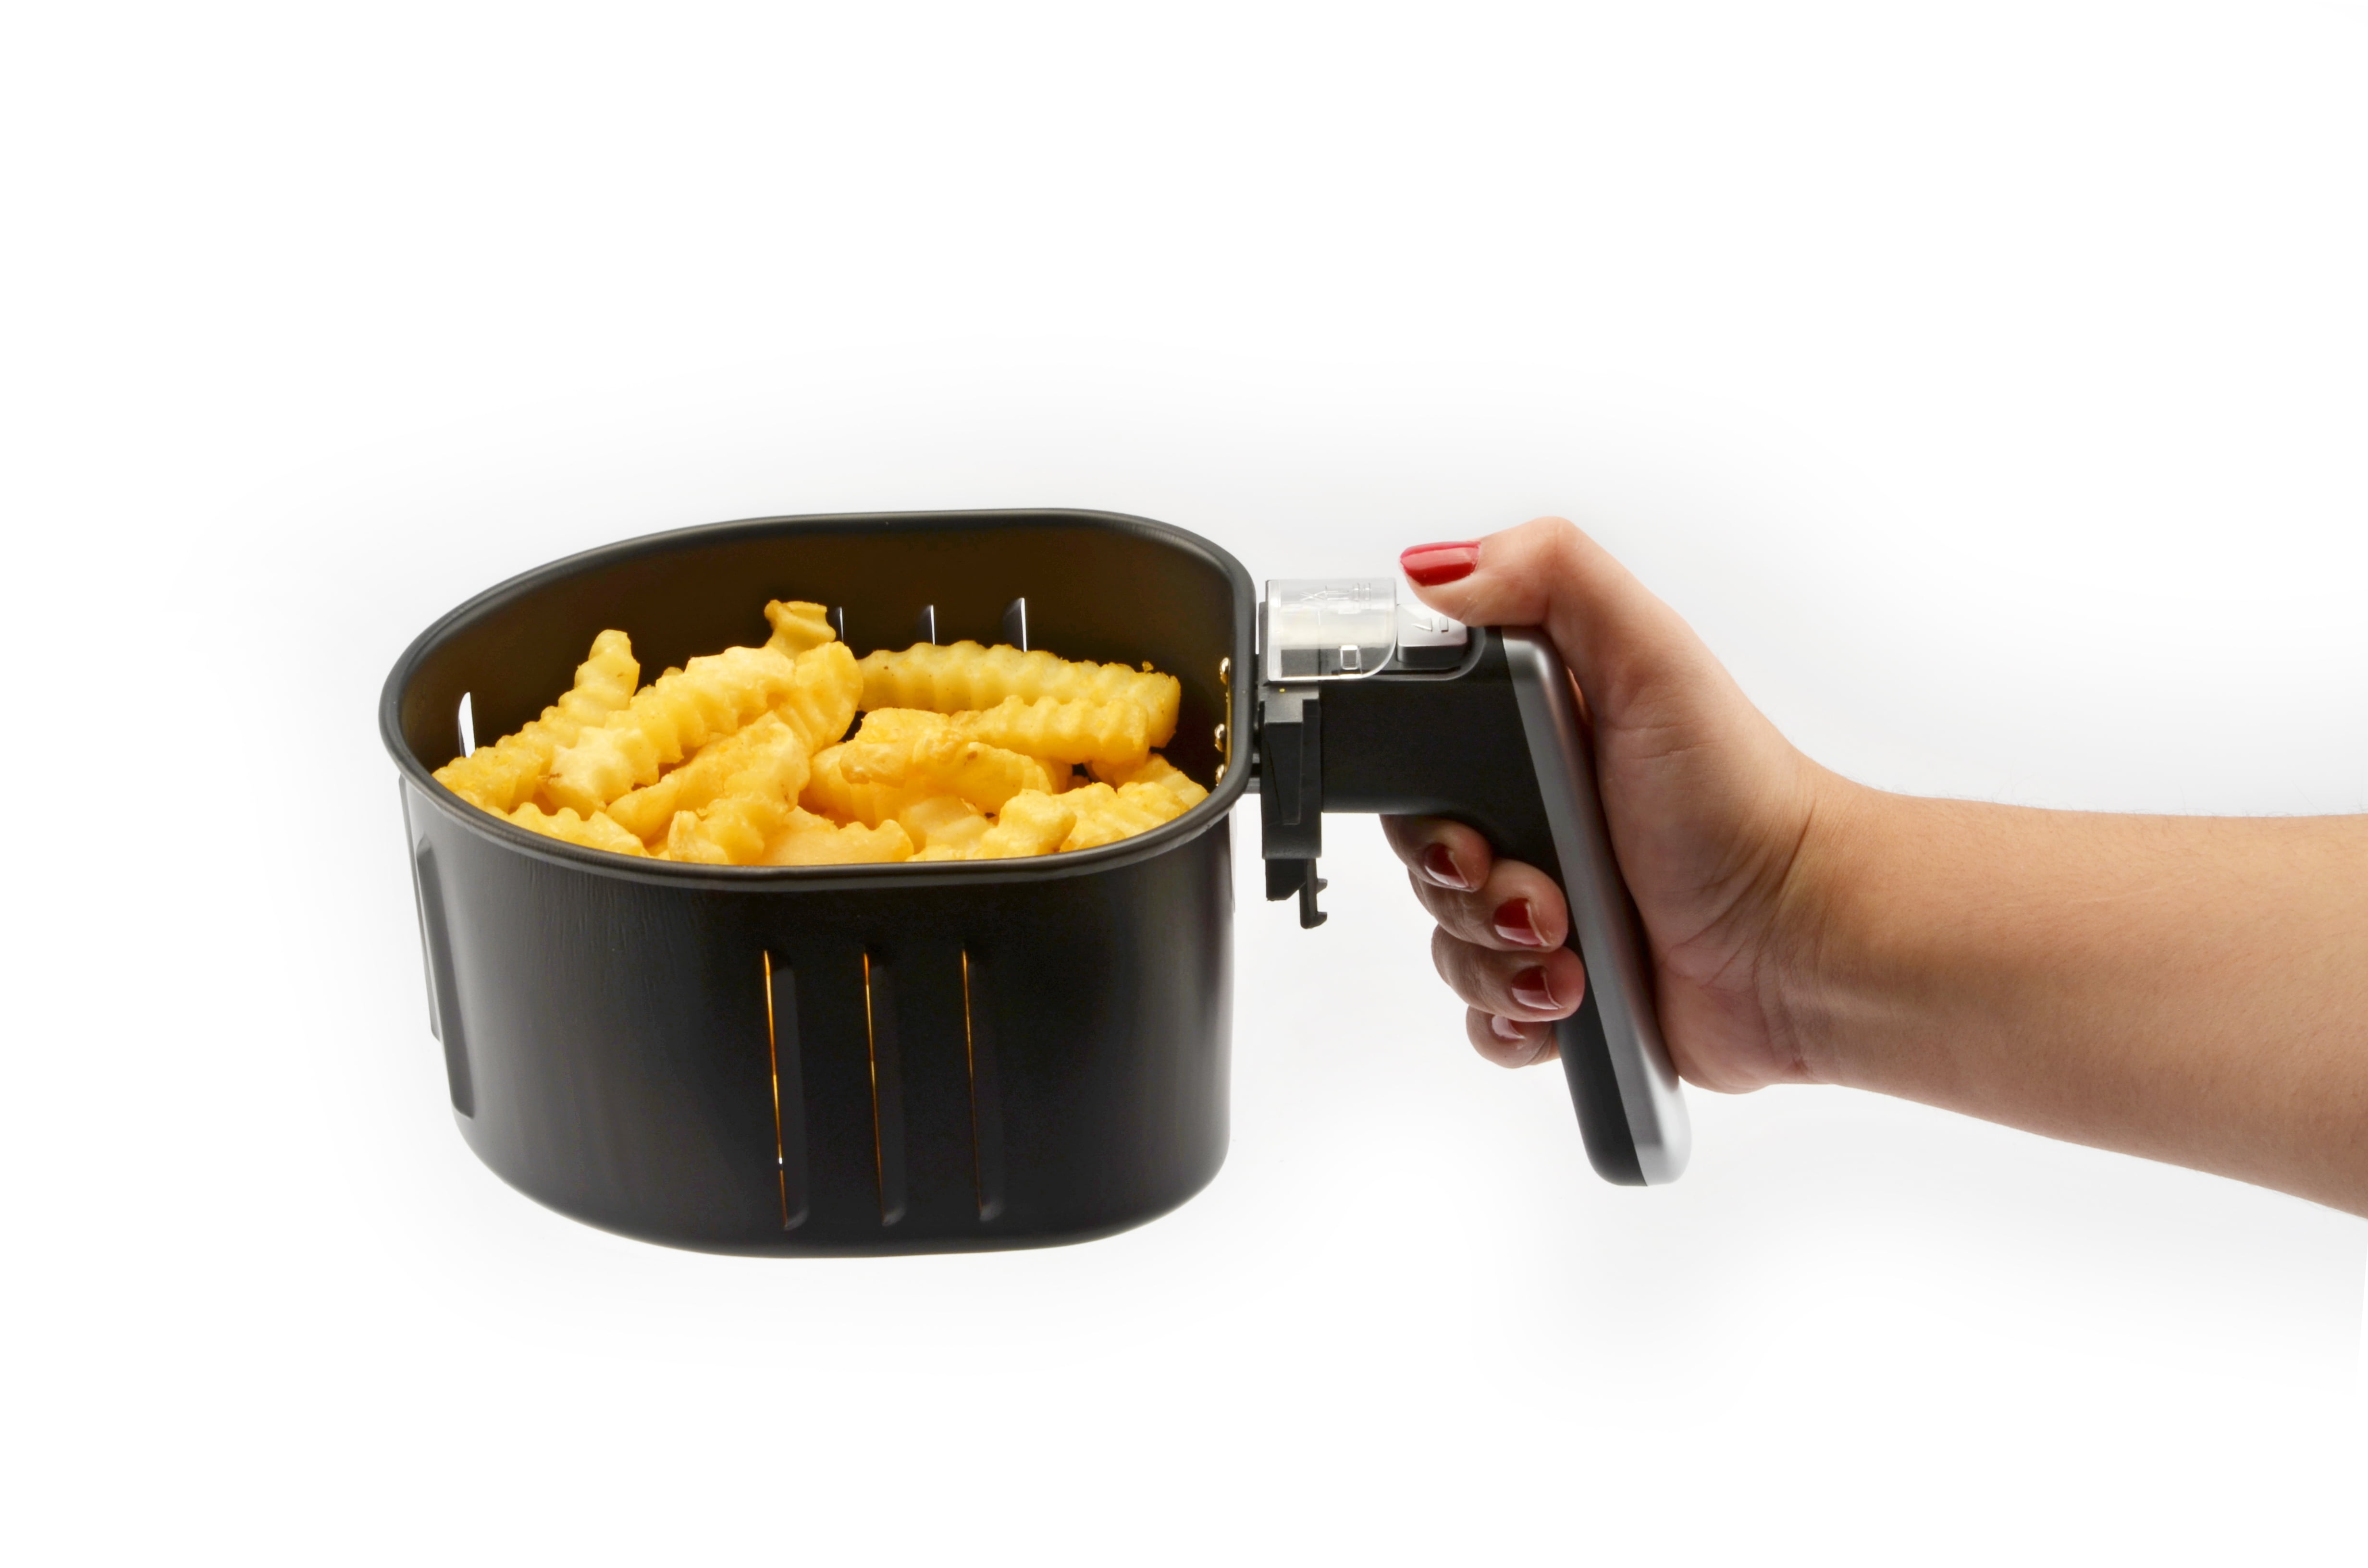 Toastmaster Air Fryer with Rotisserie 11 Liter (1 ct)